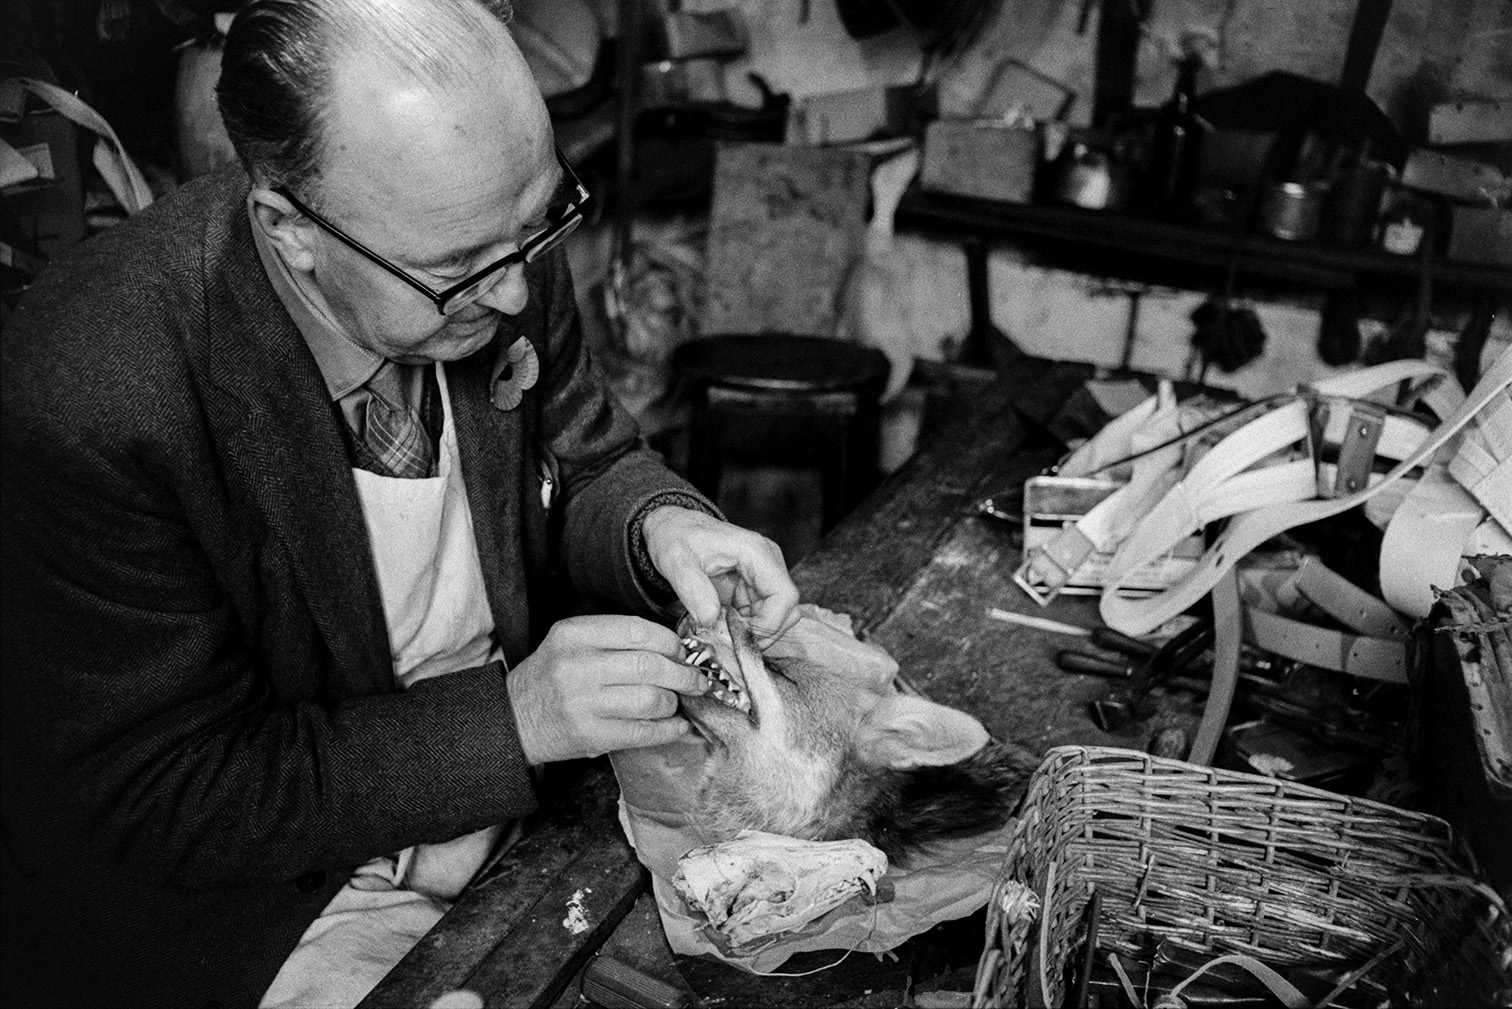 Walter Johns, a taxidermist and saddler, stuffing a foxes head in his saddlery workshop in Bideford. Various tools and items are on the workbench.